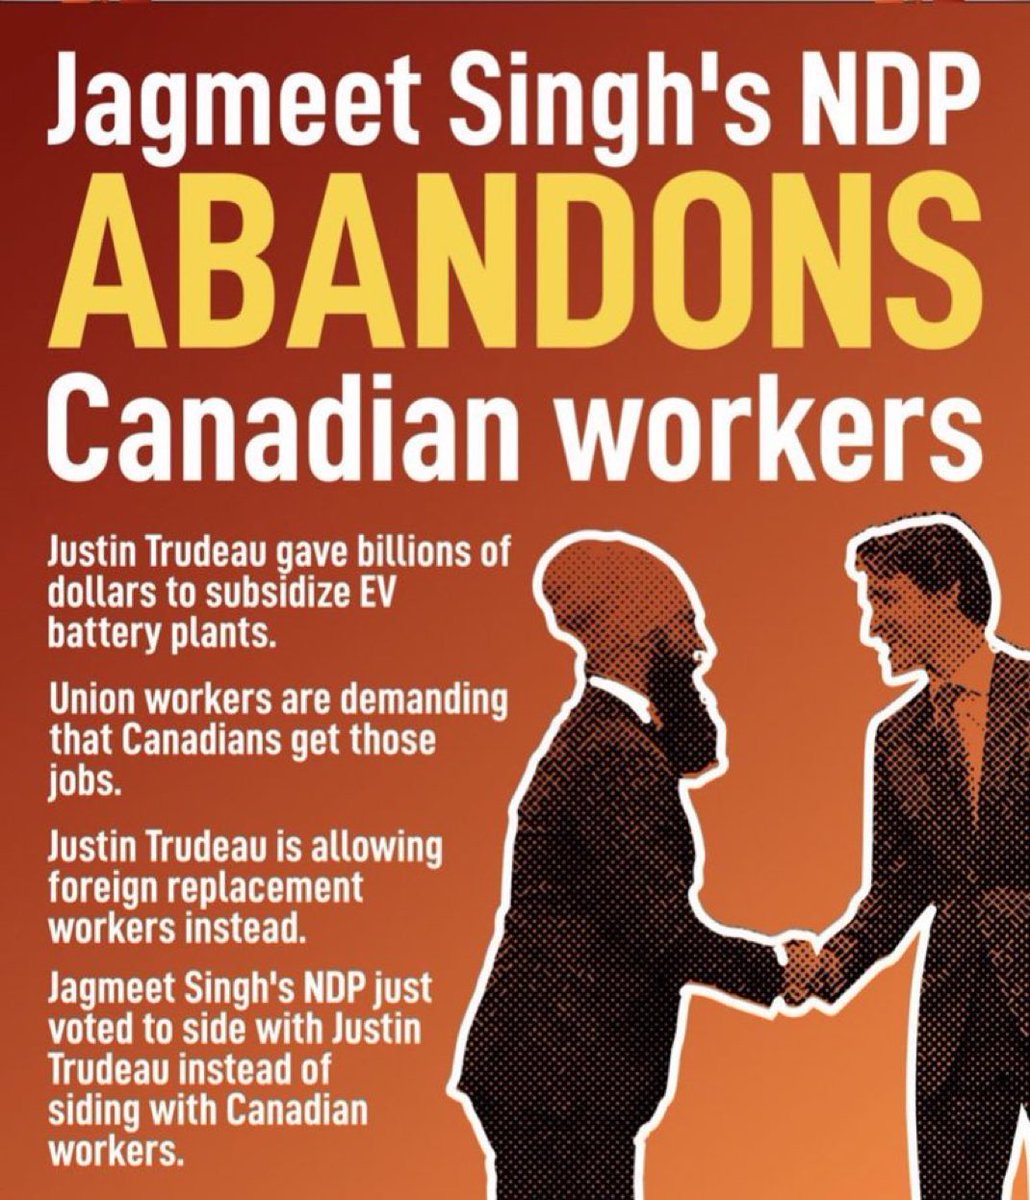 The hypocrisy of Singh must be exposed ! His pontifications are just politically expedient attempting to cater to his declining base. The harsh reality is that his pension vesting appears to be his priority not the will of the people ! Who agrees ?